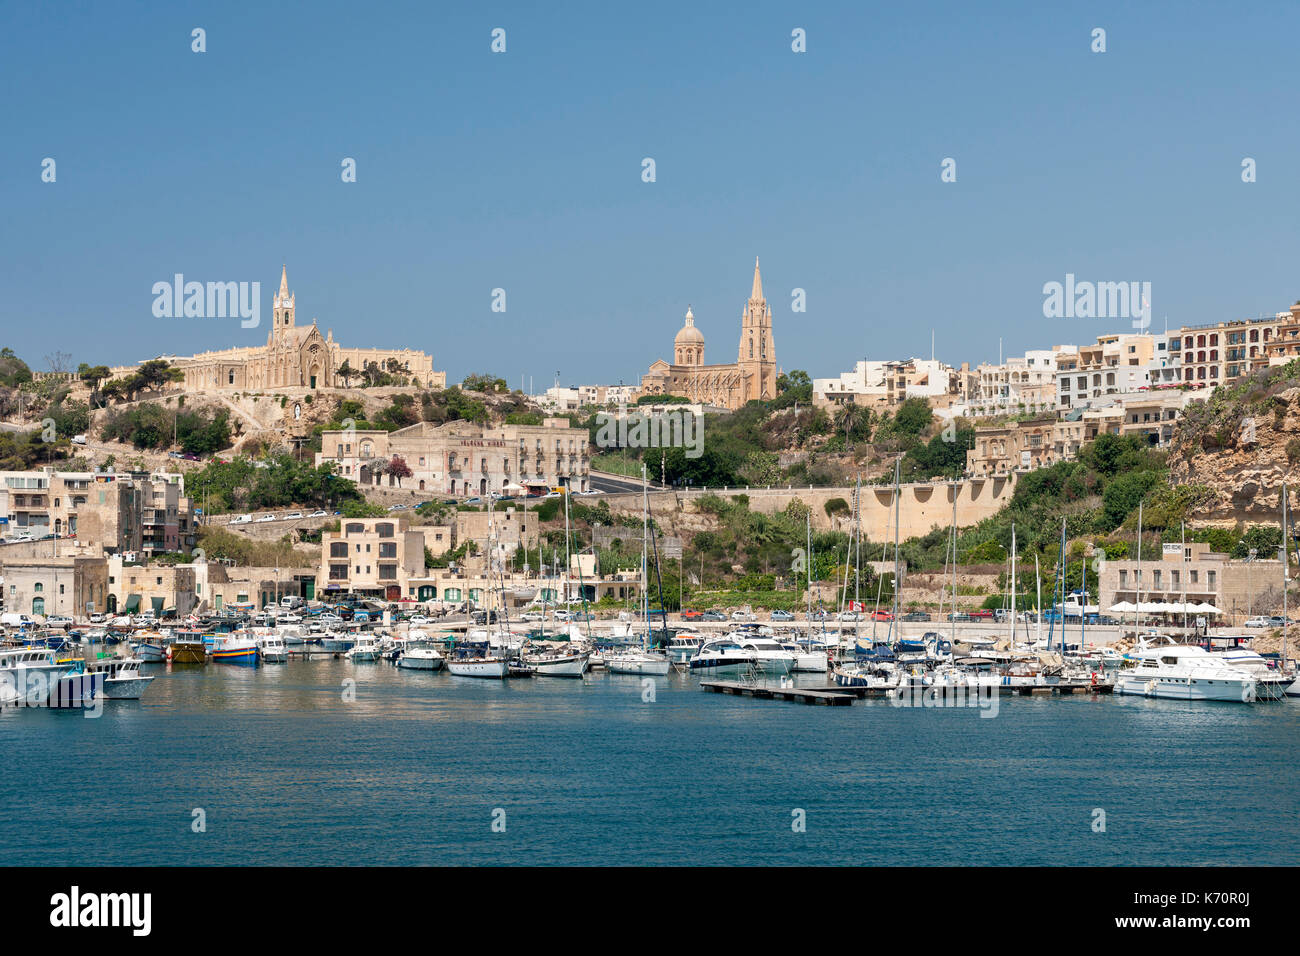 Mġarr town and harbour on the island of Gozo in Malta. Stock Photo